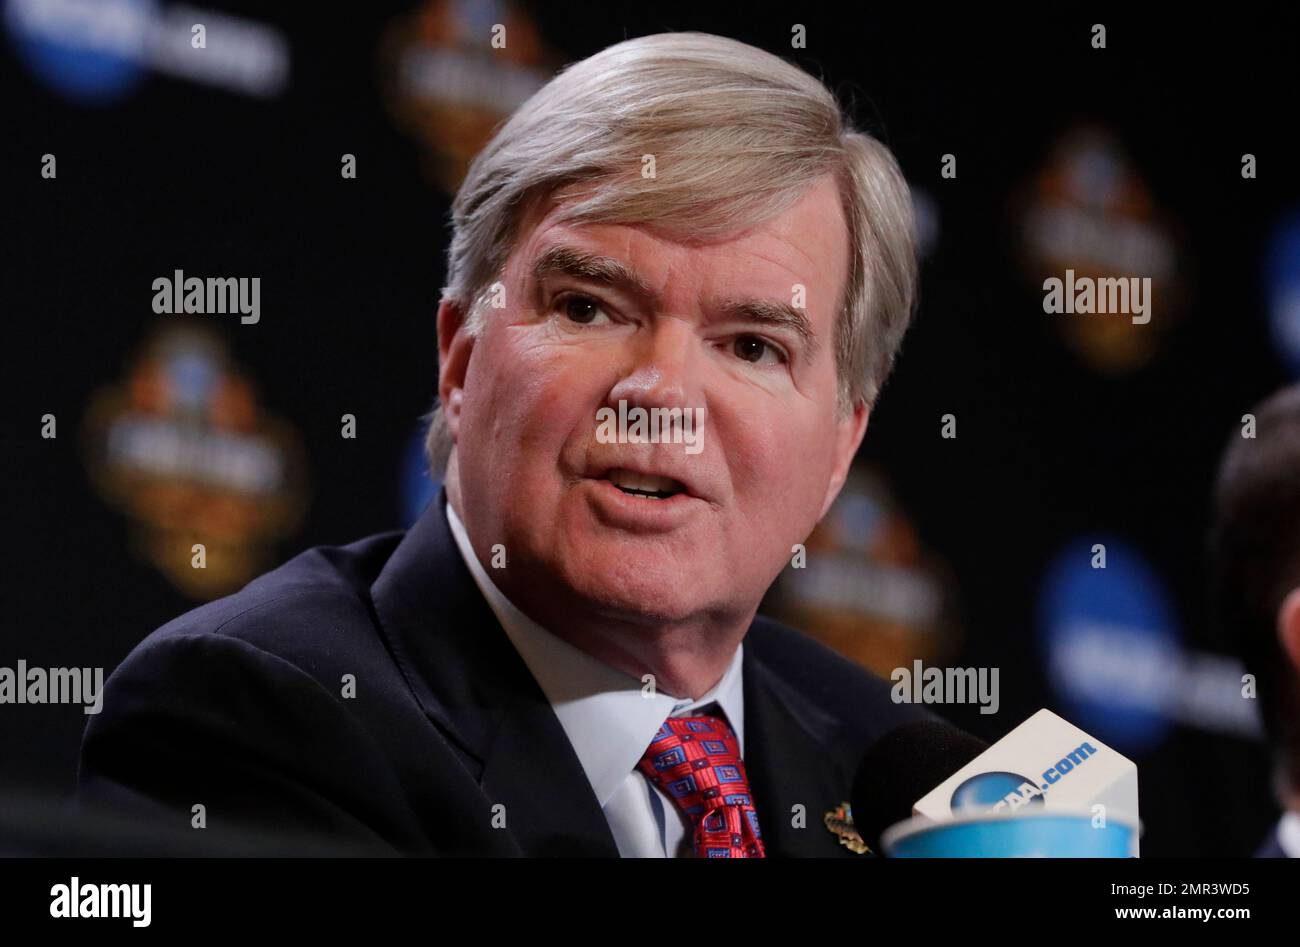 FILE - In this March 30, 2017, file photo, NCAA President Mark Emmert answers a question at a news conference in Glendale, Ariz. Emmert said Monday, Oct. 30, major changes are needed in college basketball before next season to show the public that the NCAA is capable of governing the sport in the wake of a bribery scandal. (AP Photo/Matt York, File) Banque D'Images